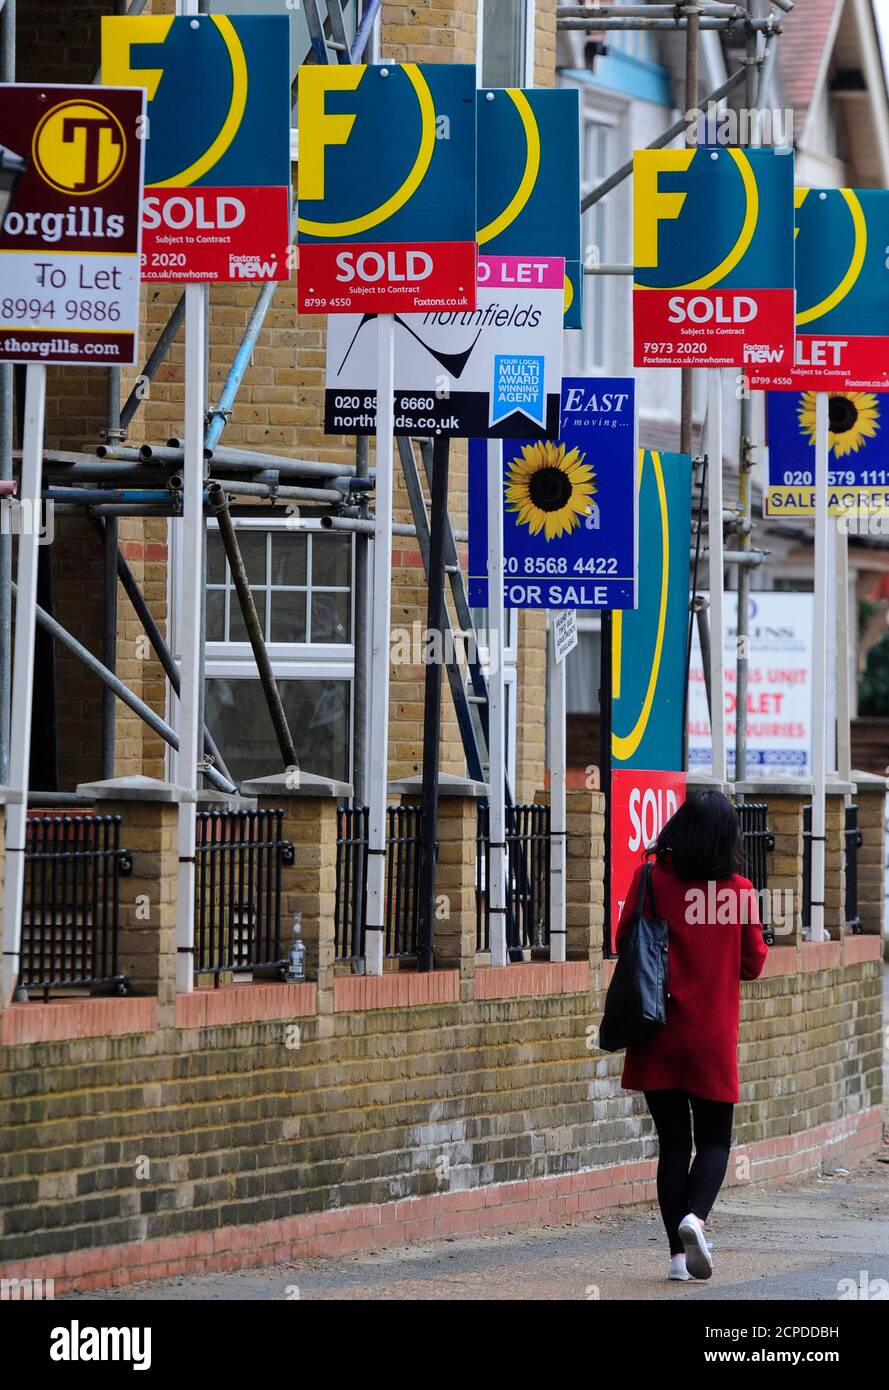 A woman passes house sales and letting signs in west London February 9, 2010. Property price rises in Britain picked up pace in January, even as unusually heavy snowfall led to a sharp drop in new buyer enquiries, a survey indicated on Tuesday.     REUTERS/Toby Melville (BRITAIN - Tags: BUSINESS) Stock Photo